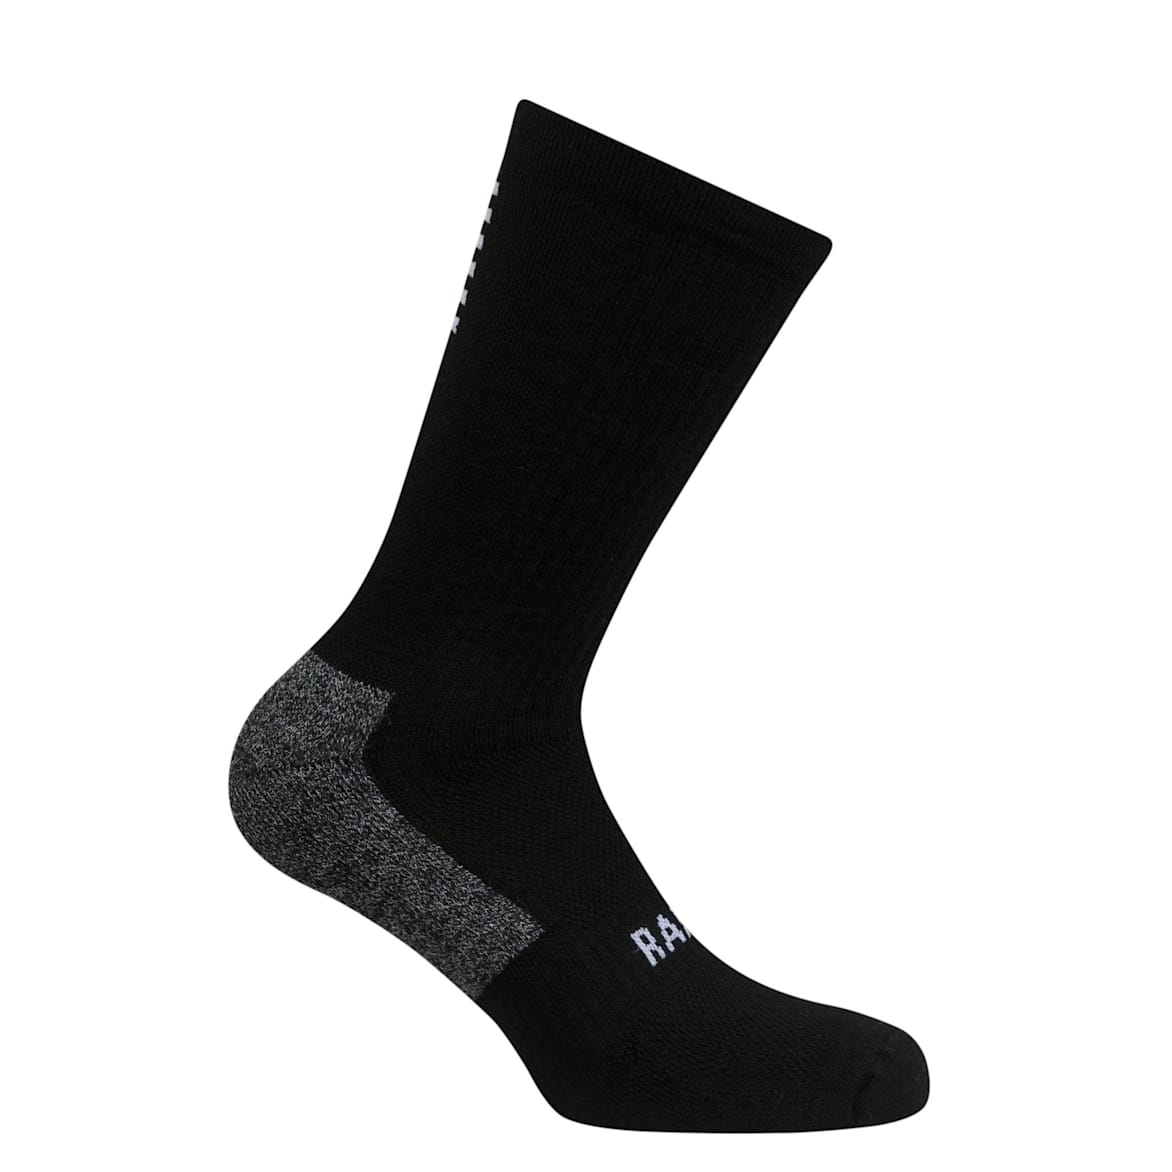 Cycling Footwear Accessories | Socks & Reflective Overshoes | Rapha